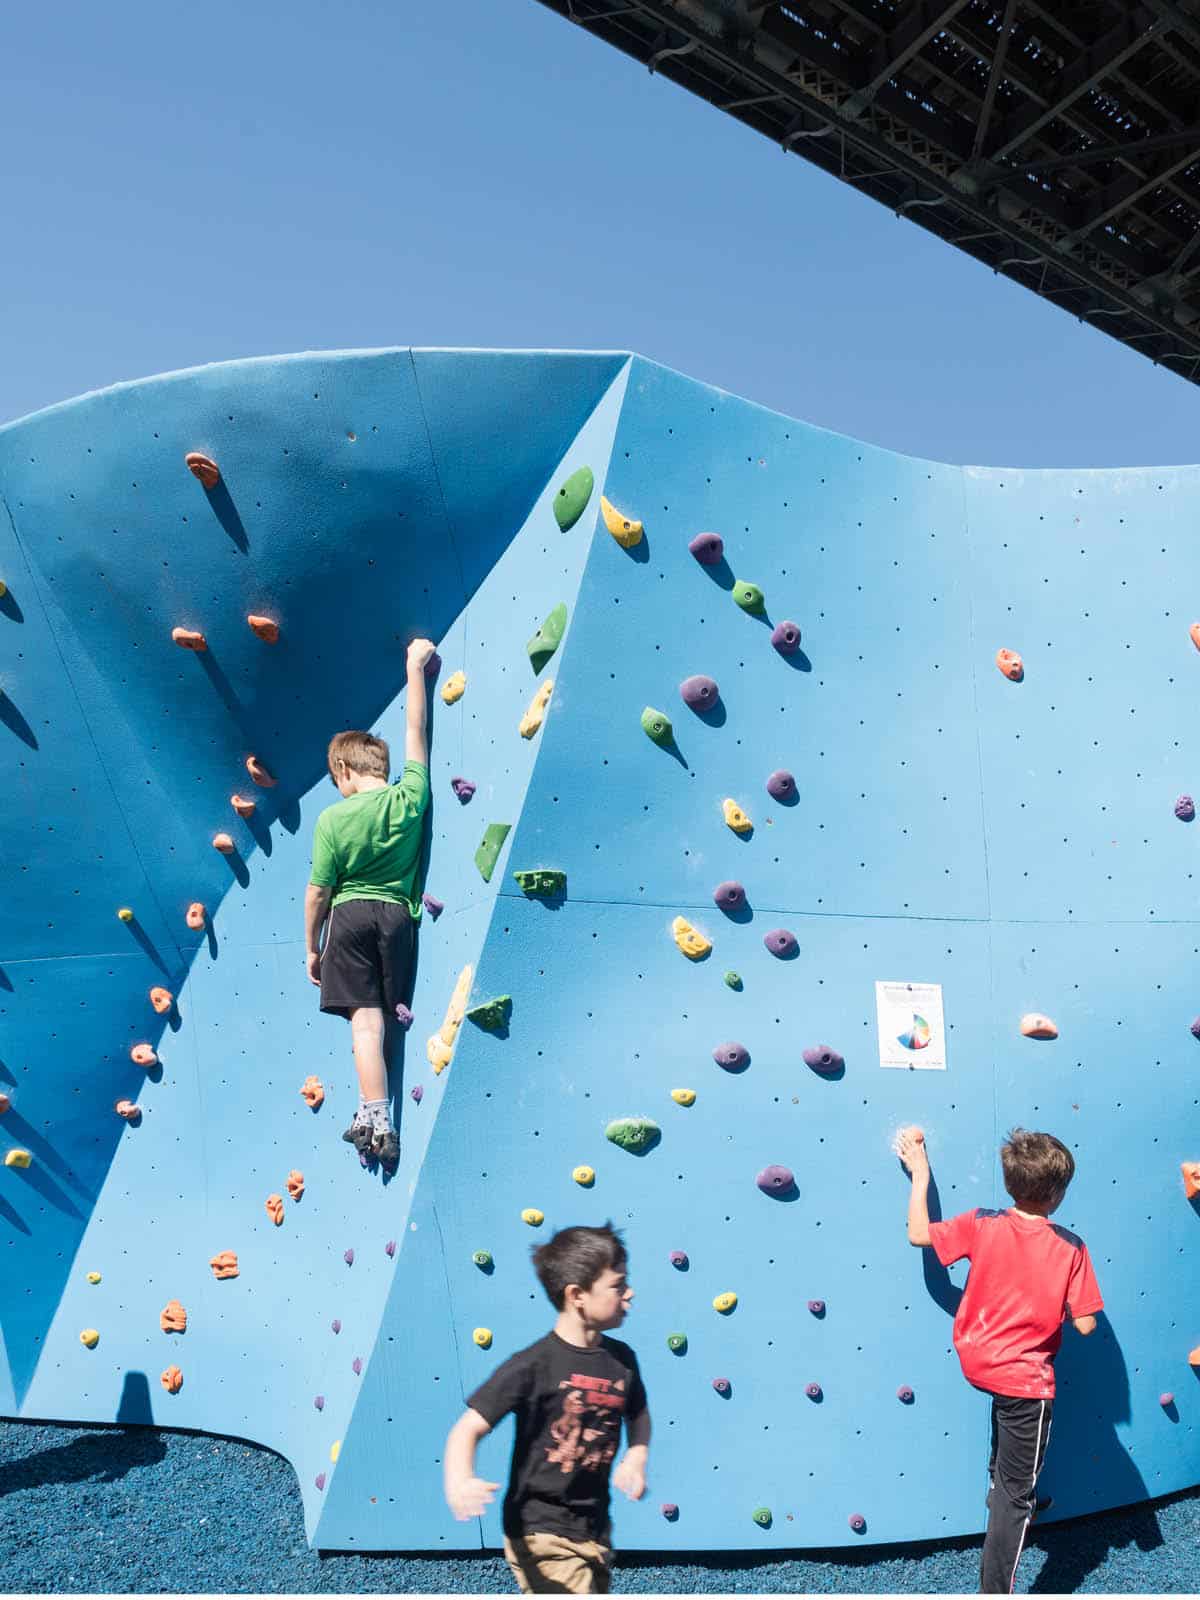 Children climbing a bouldering wall on a sunny day.